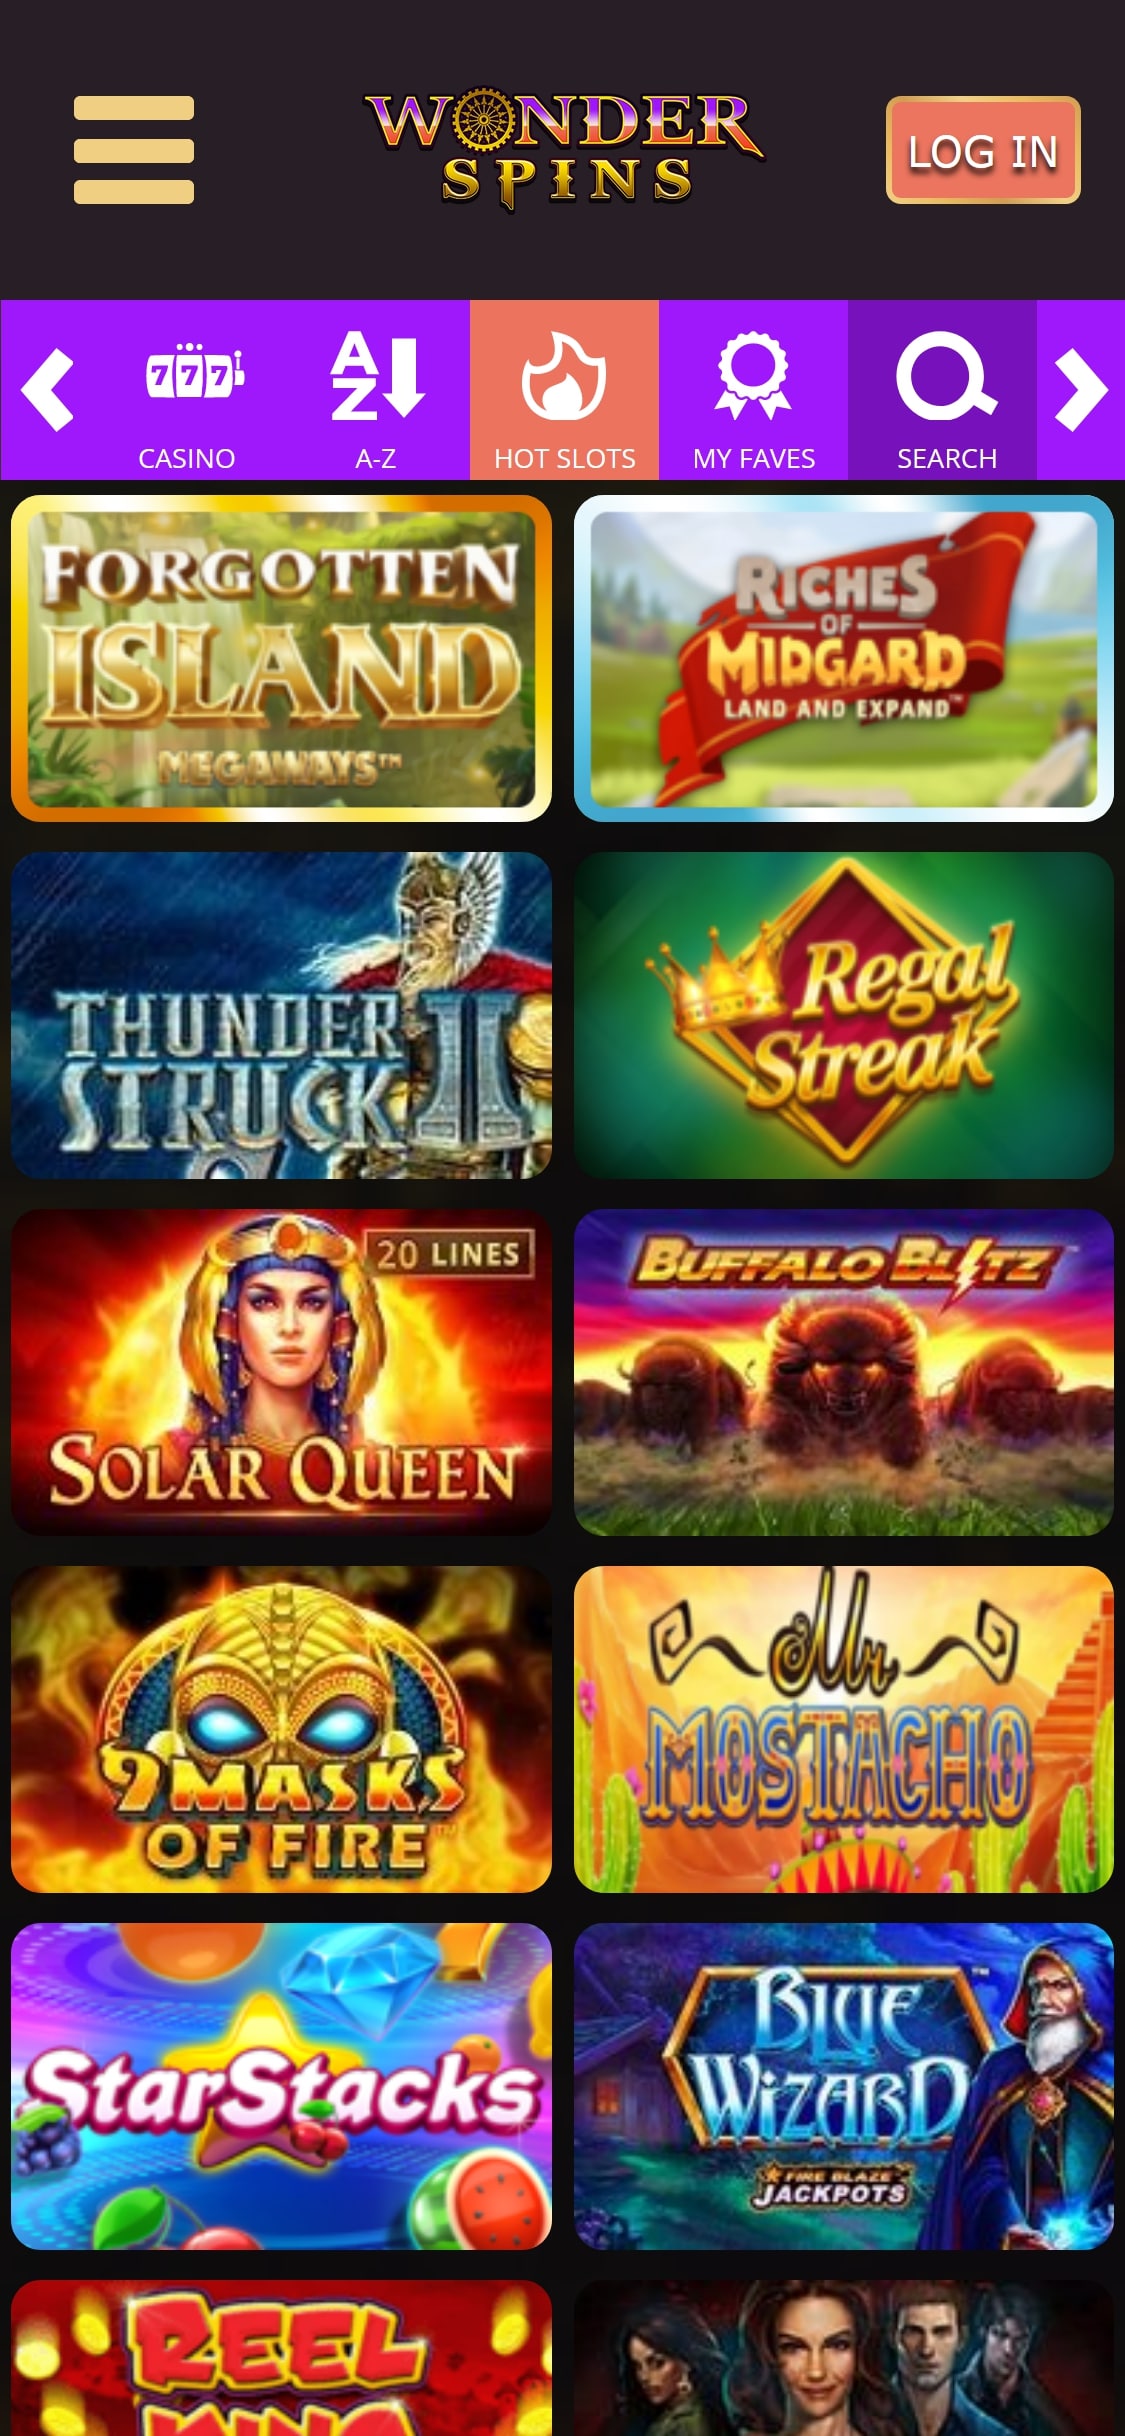 Wonder Spins Casino Mobile Games Review